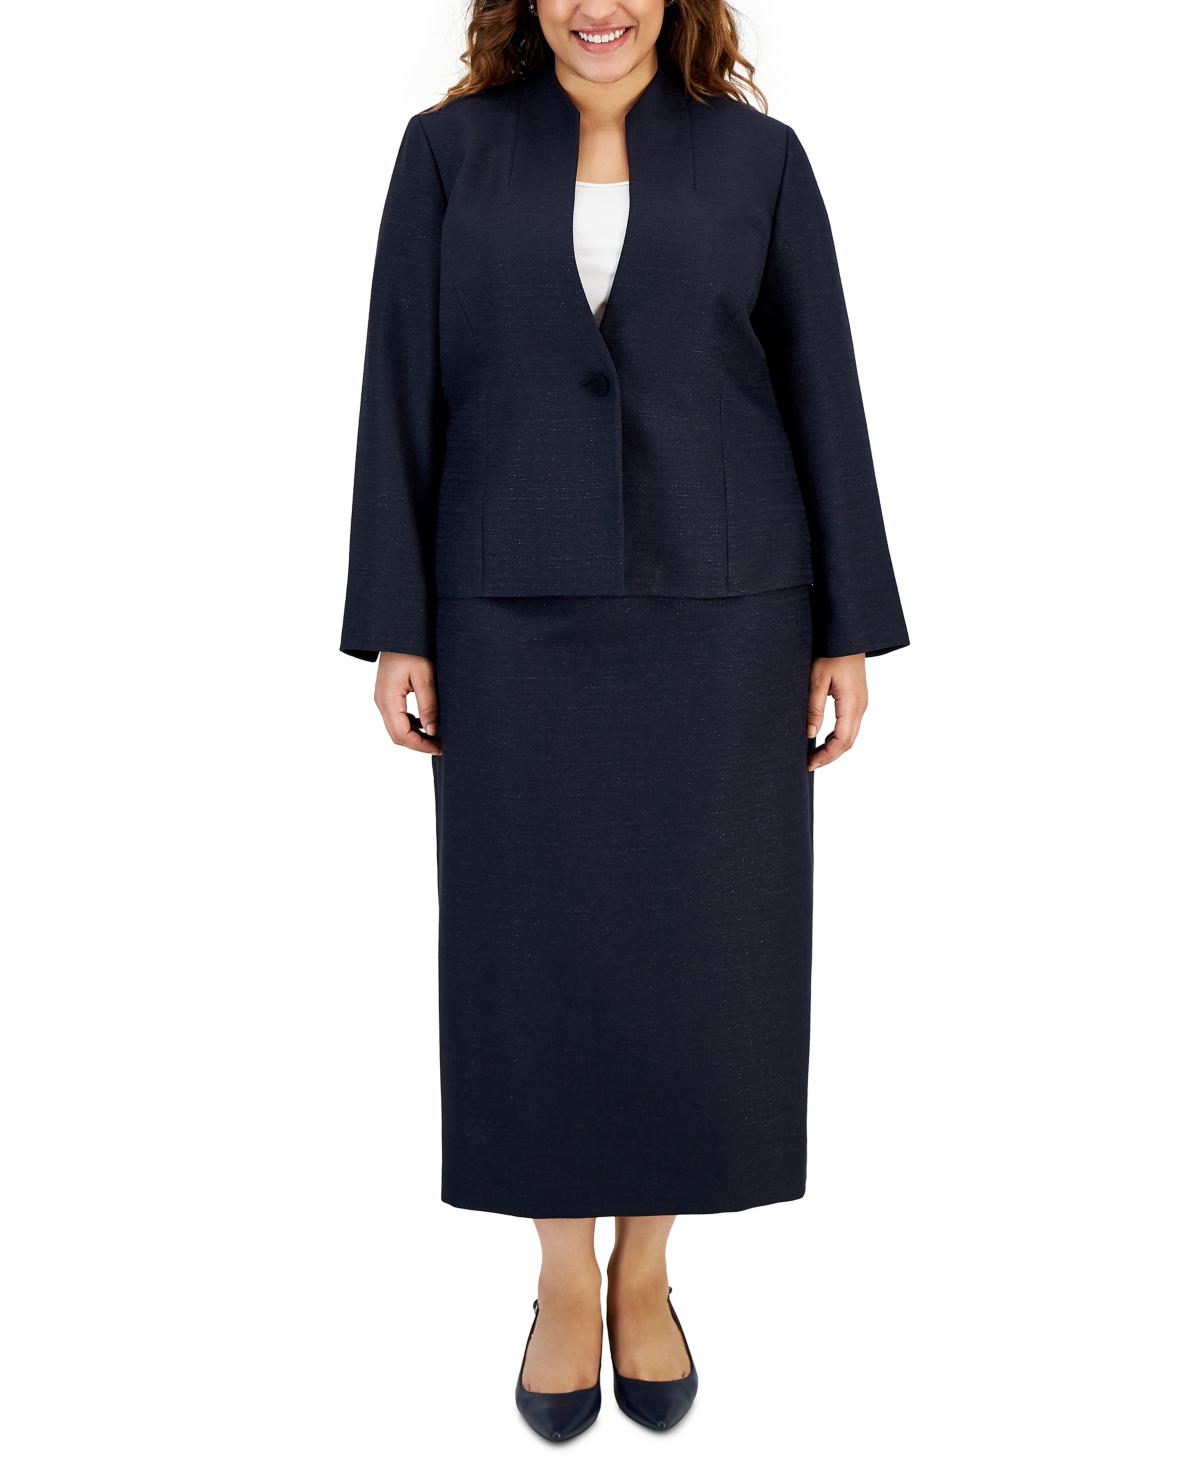 Le Suit Plus Size Shimmer Tweed Jacket & Midi Skirt In Navy